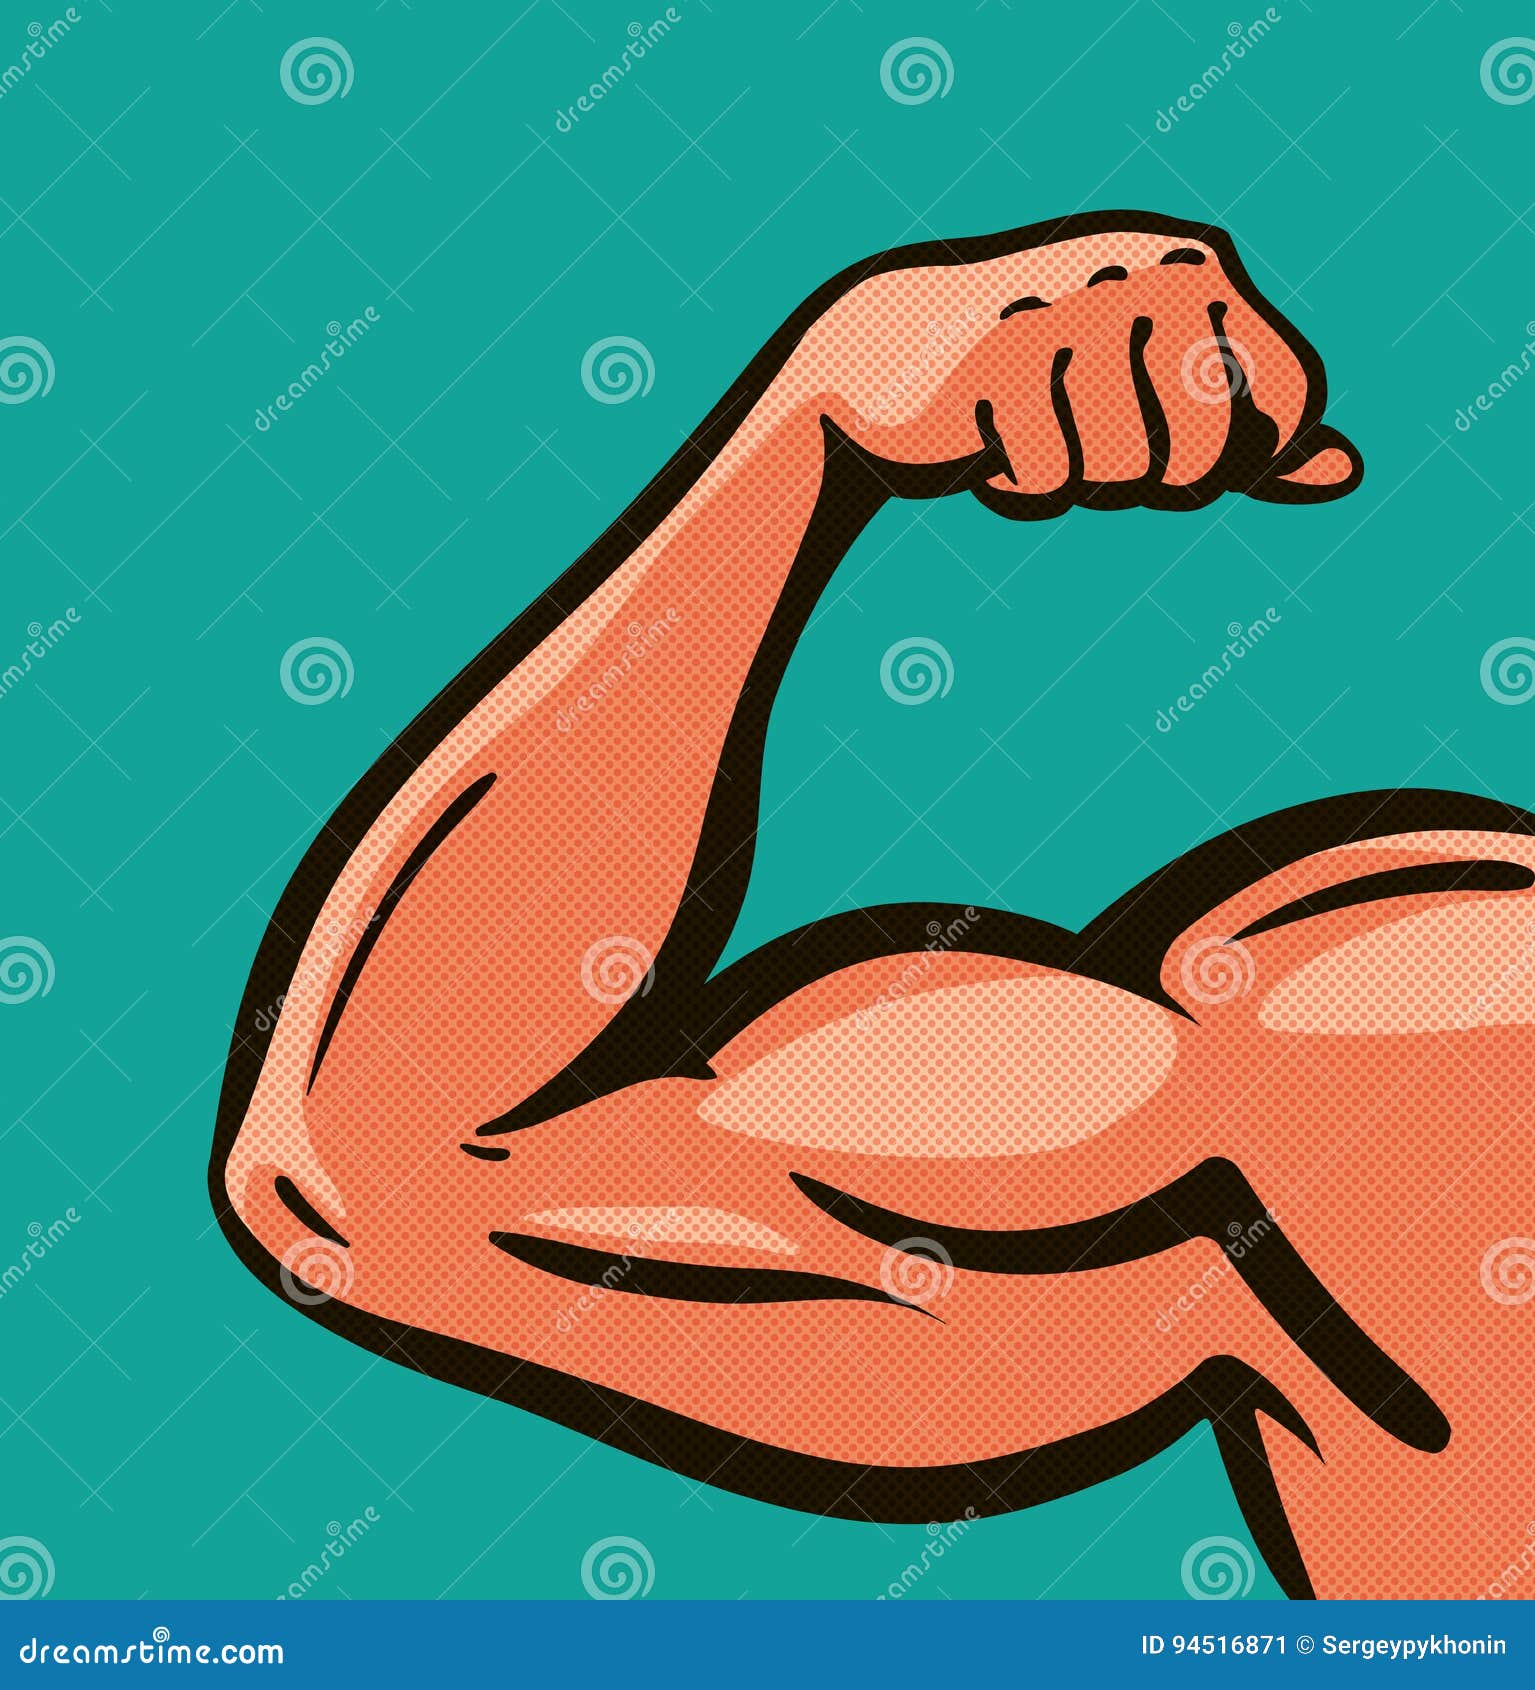 https://thumbs.dreamstime.com/z/strong-arm-muscles-gym-comics-style-design-vector-illustration-cartoon-94516871.jpg